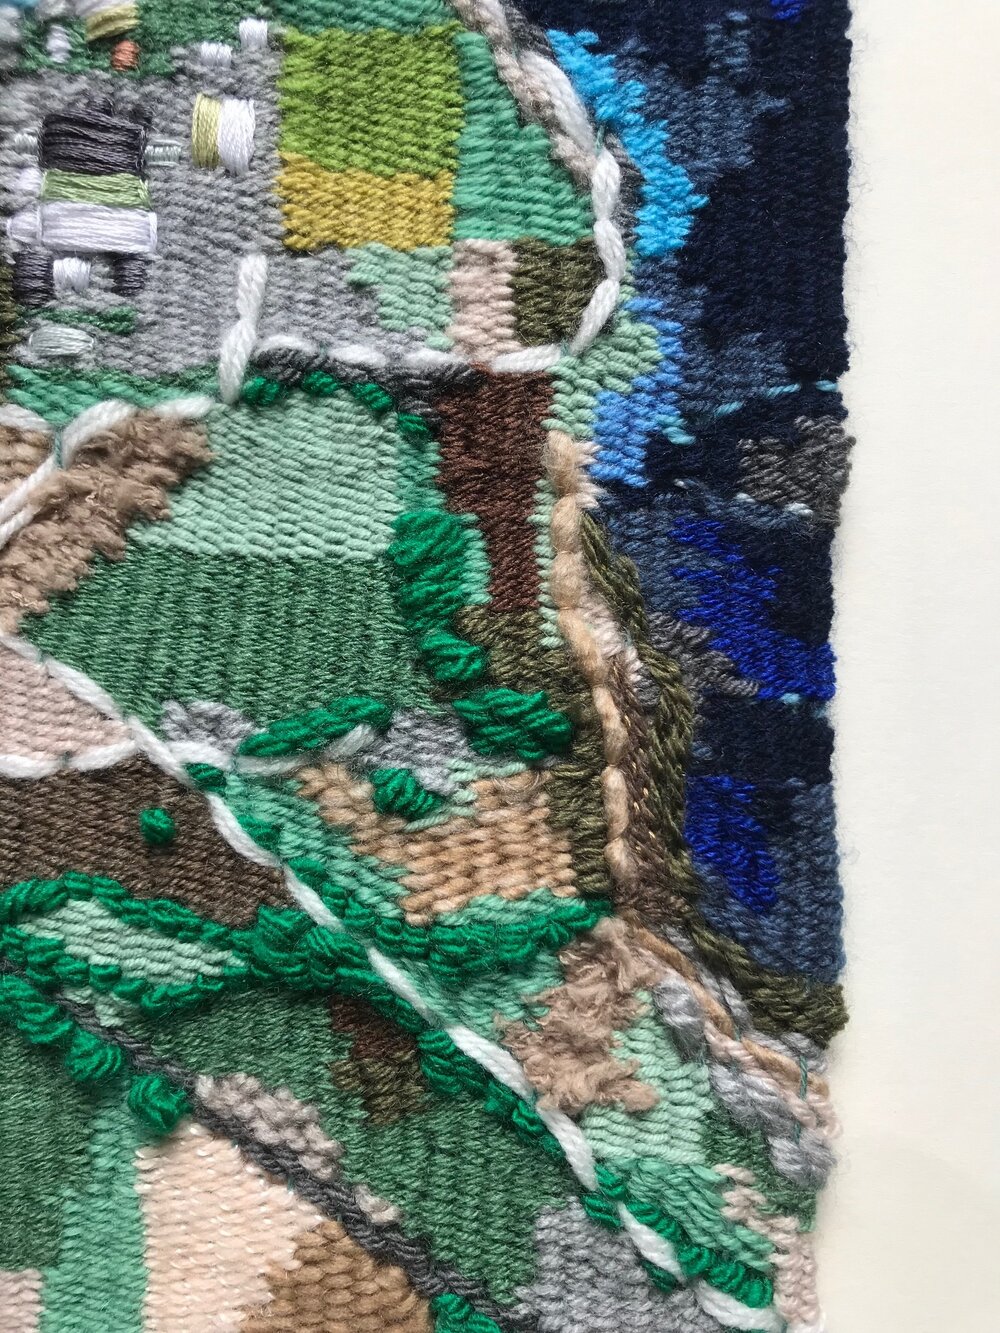  The lumpy right edge of the tapestry 